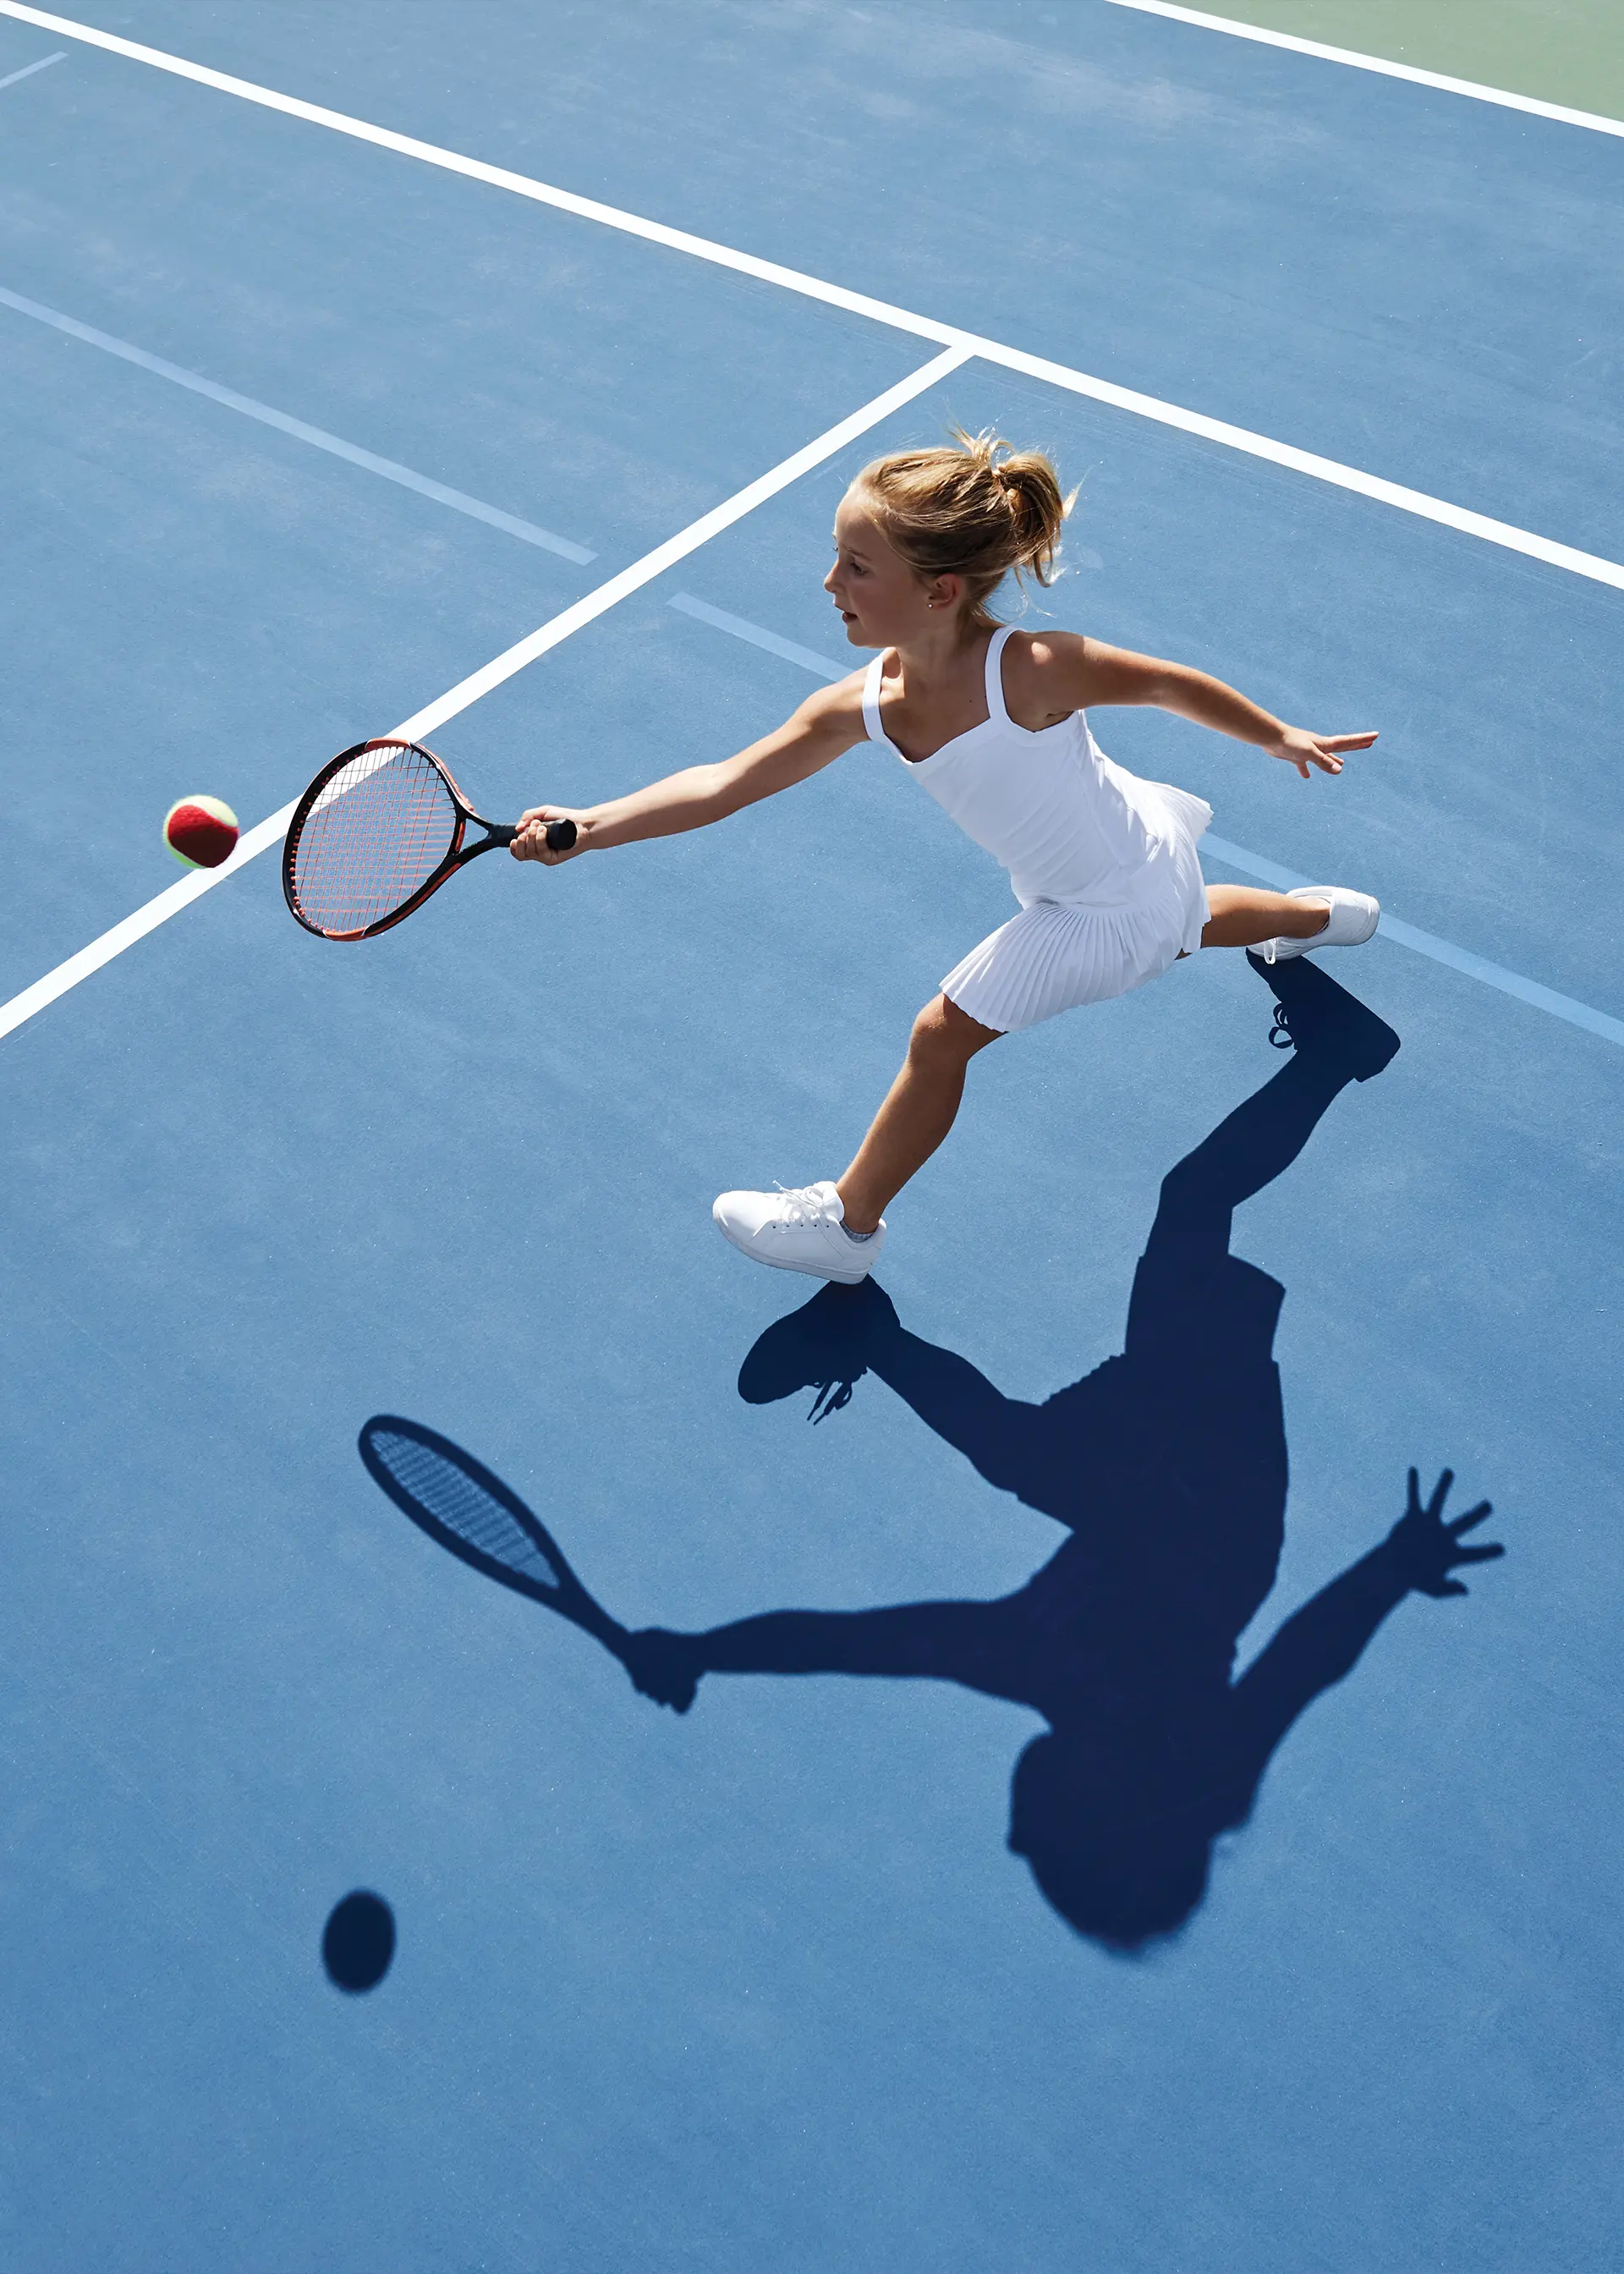 A person on a tennis court wearing white clothing and shoes holding a racket and reaching to hit a tennis ball.